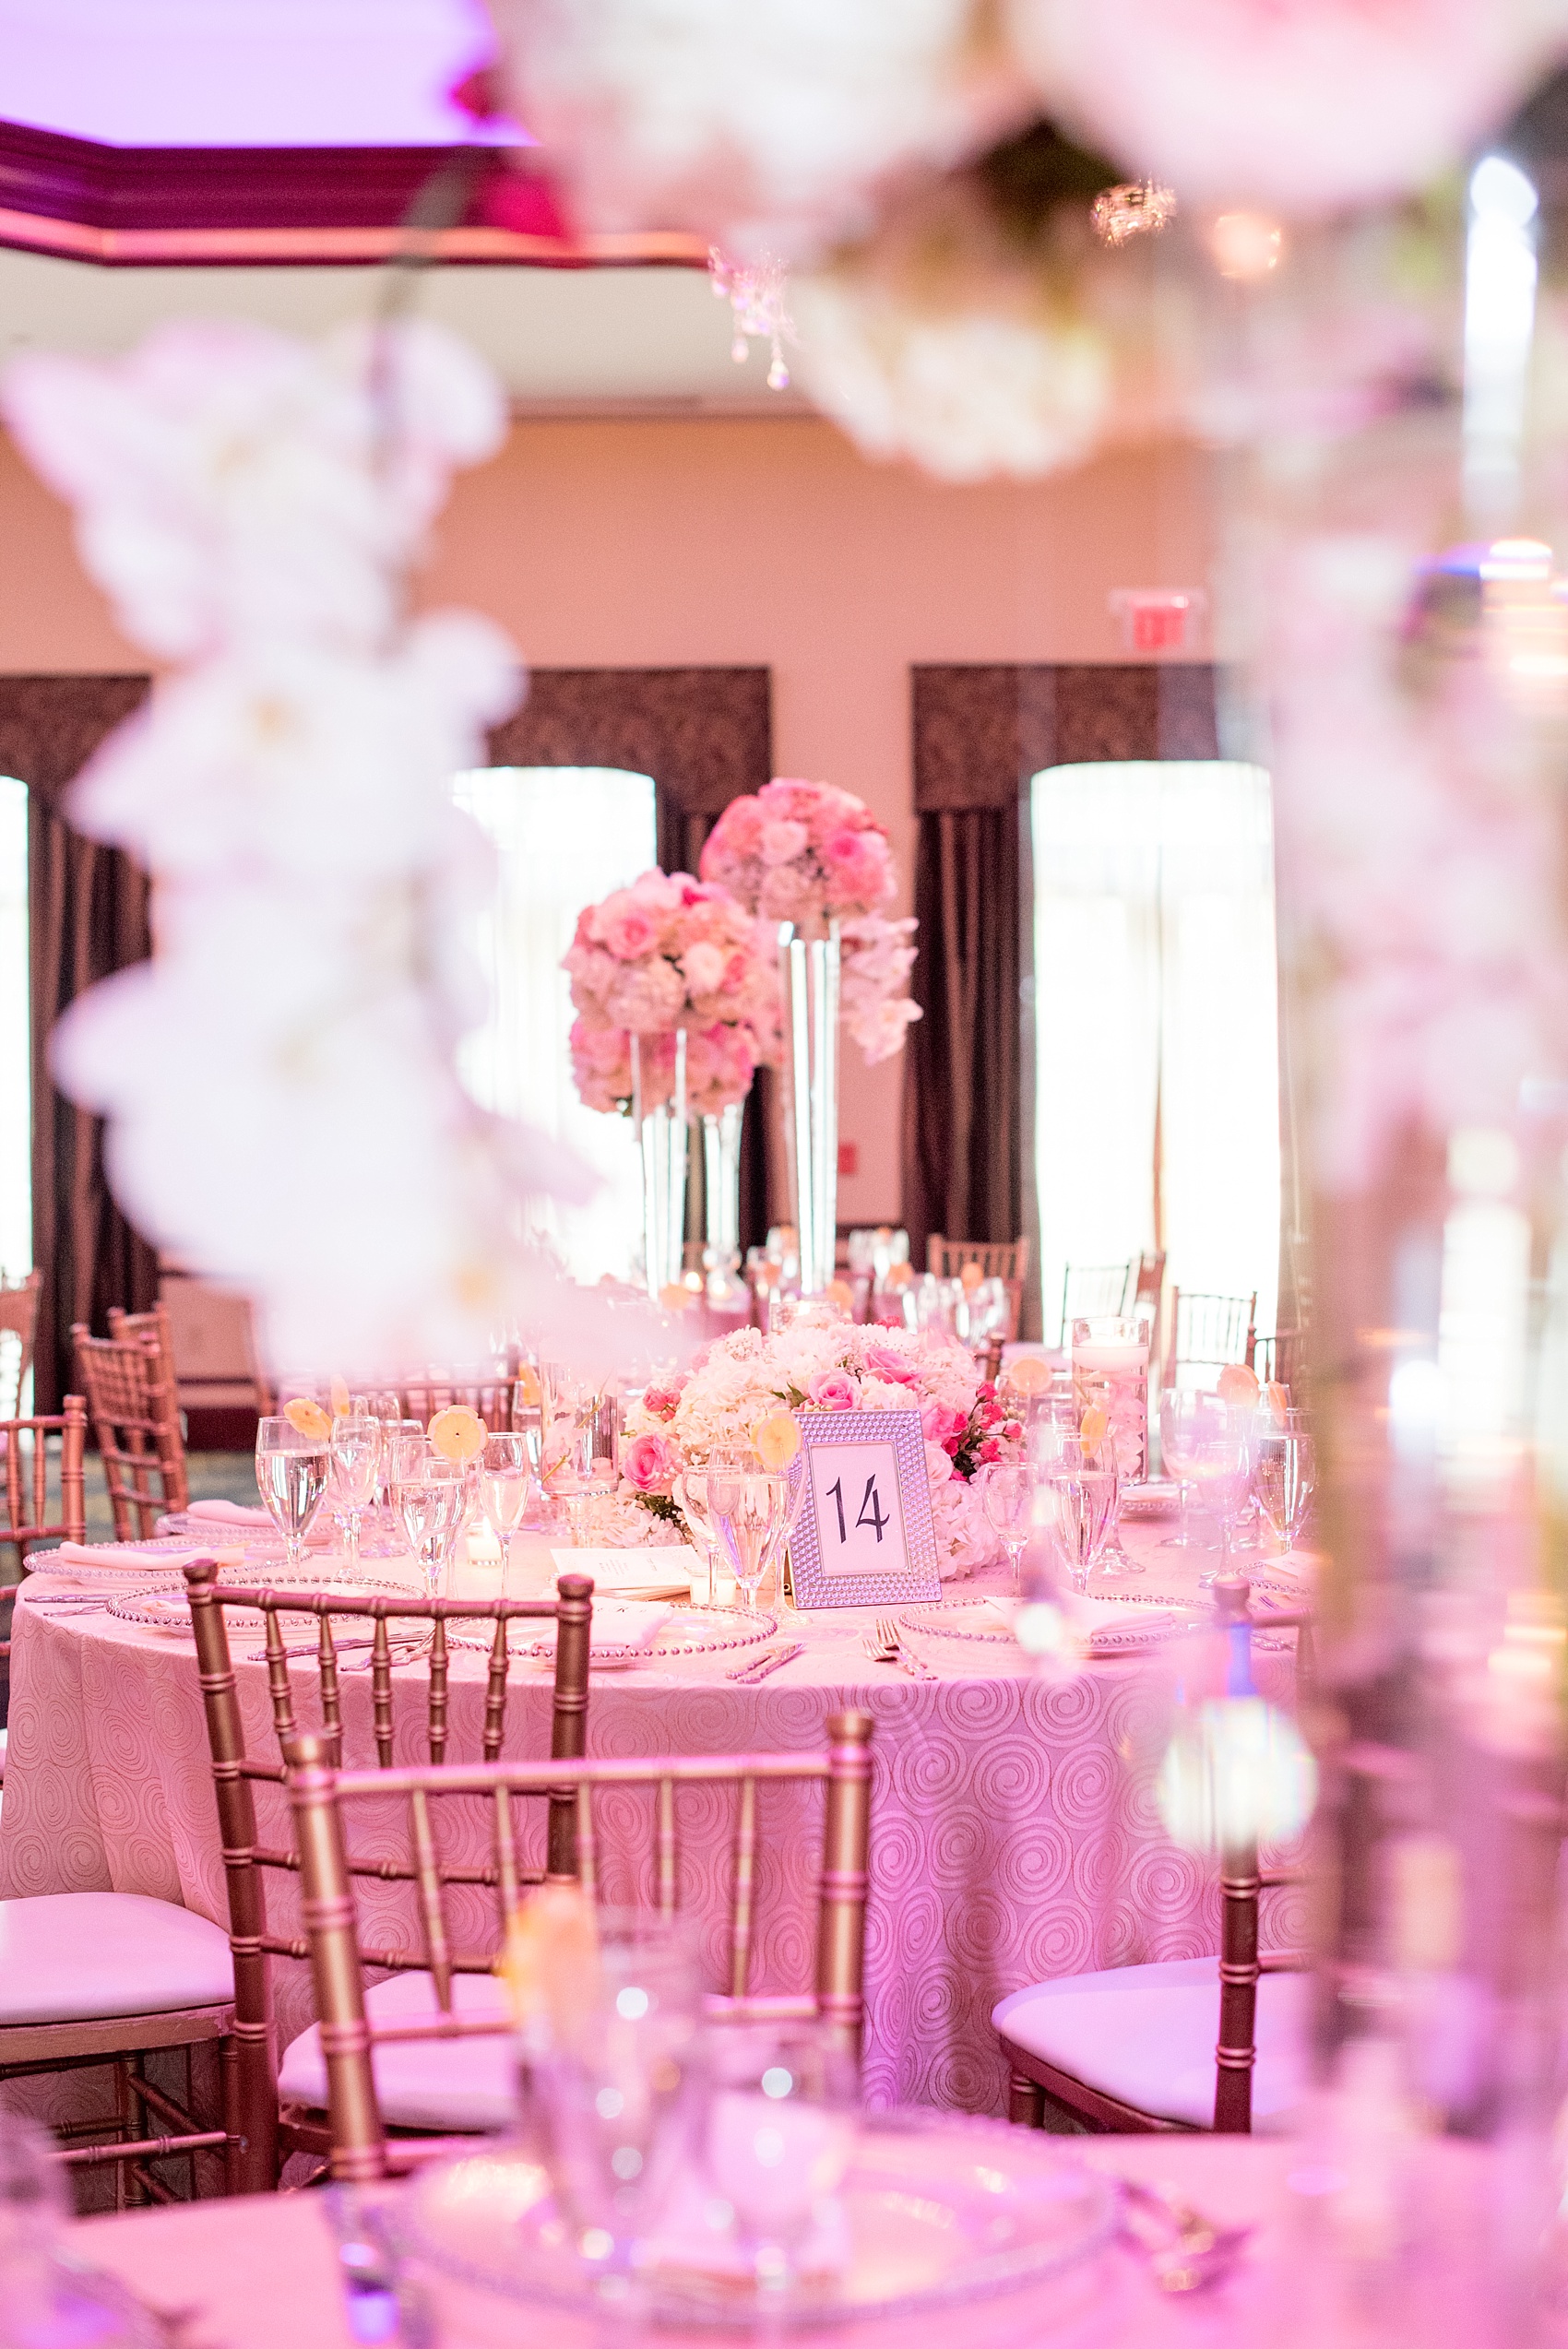 Mikkel Paige Photography photos of an elegant reception with pink and white details at Temple Emanu-El in Closter, NJ with floral centerpieces high and low.